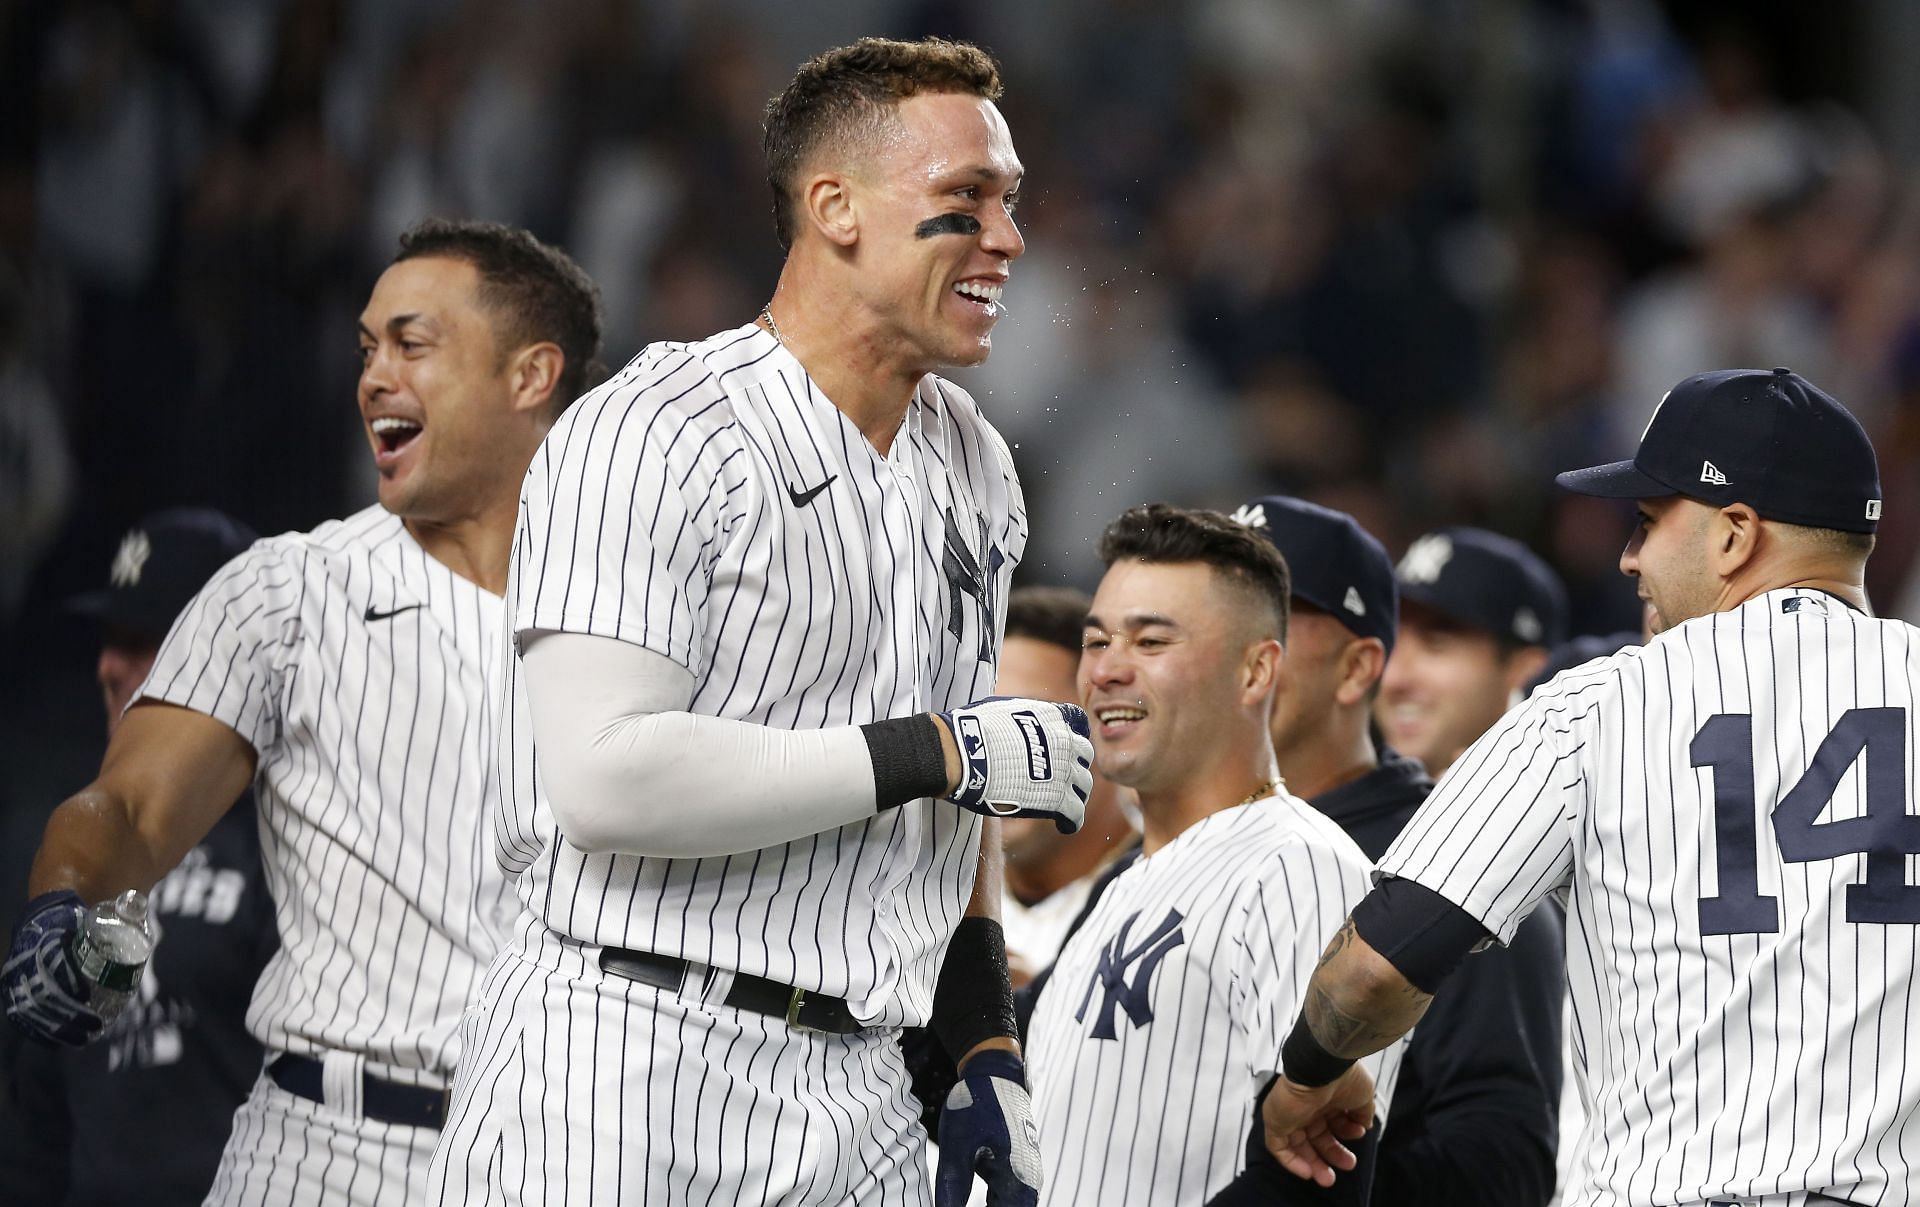 The Yankees celebrate after a come from behind walk-off home run by Aaron Judge against the Blue Jays in the ninth inning.